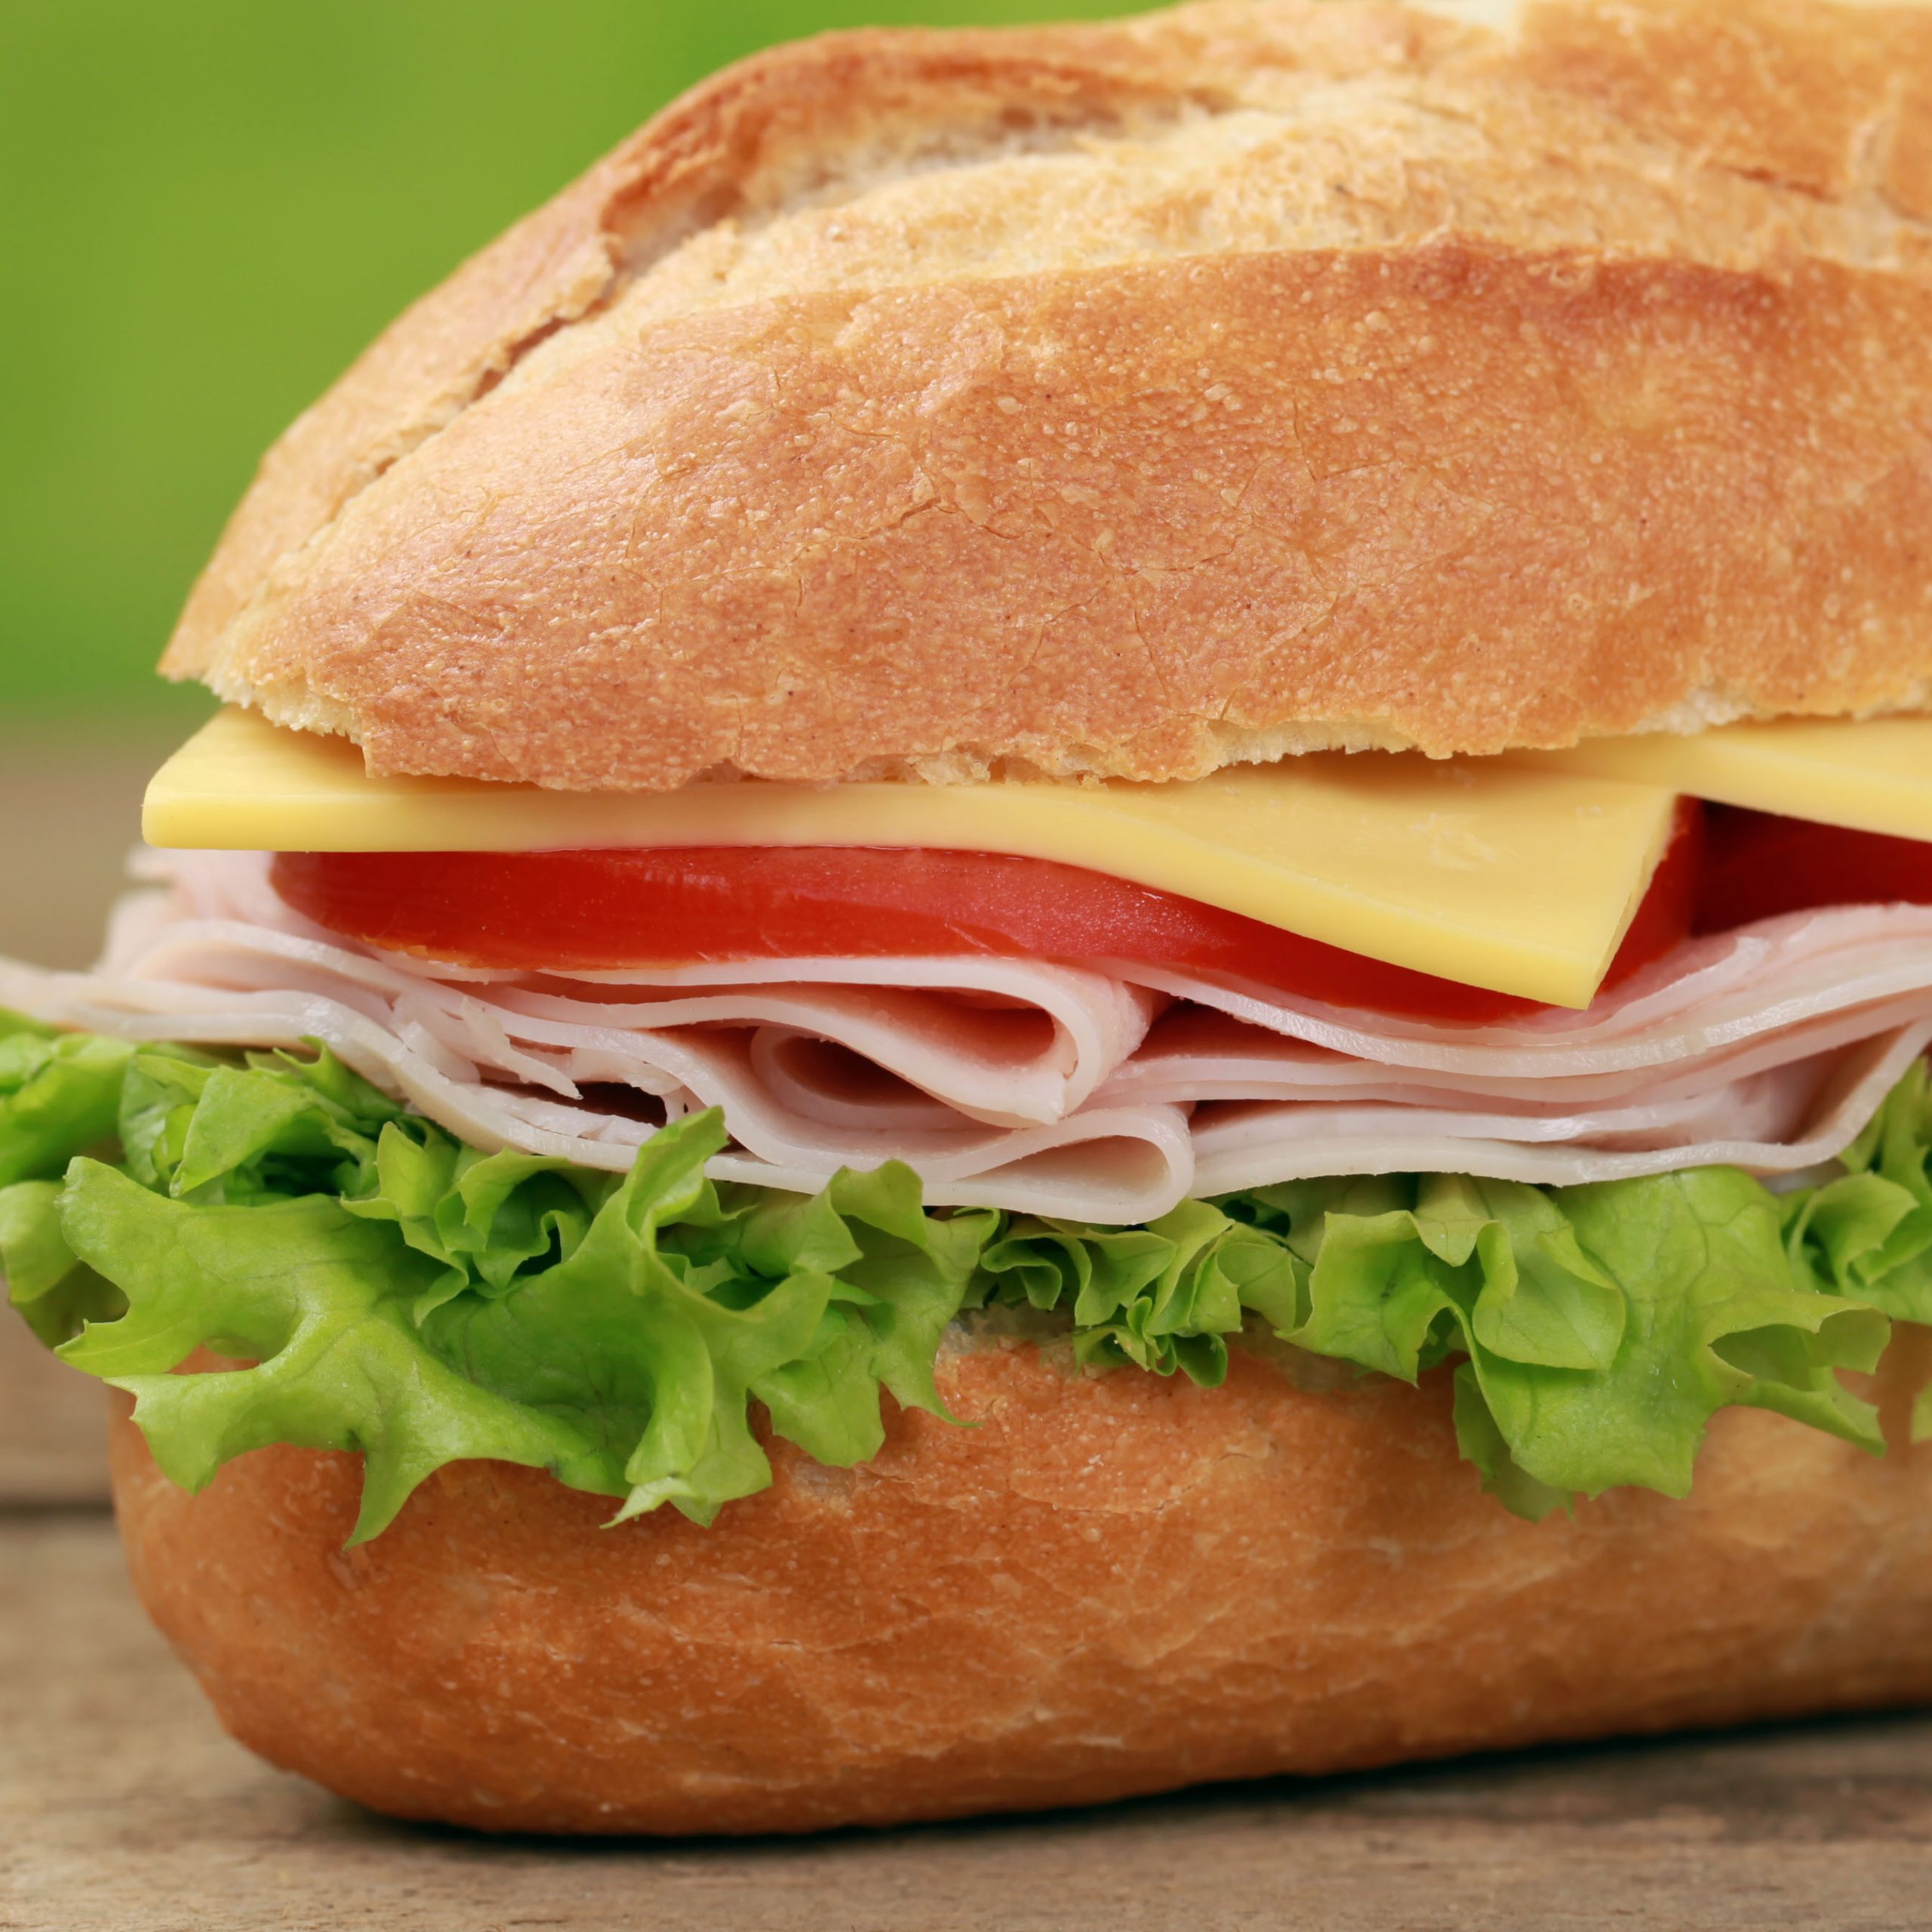 Sub Sandwiches with ham, cheese, tomatoes and lettuce